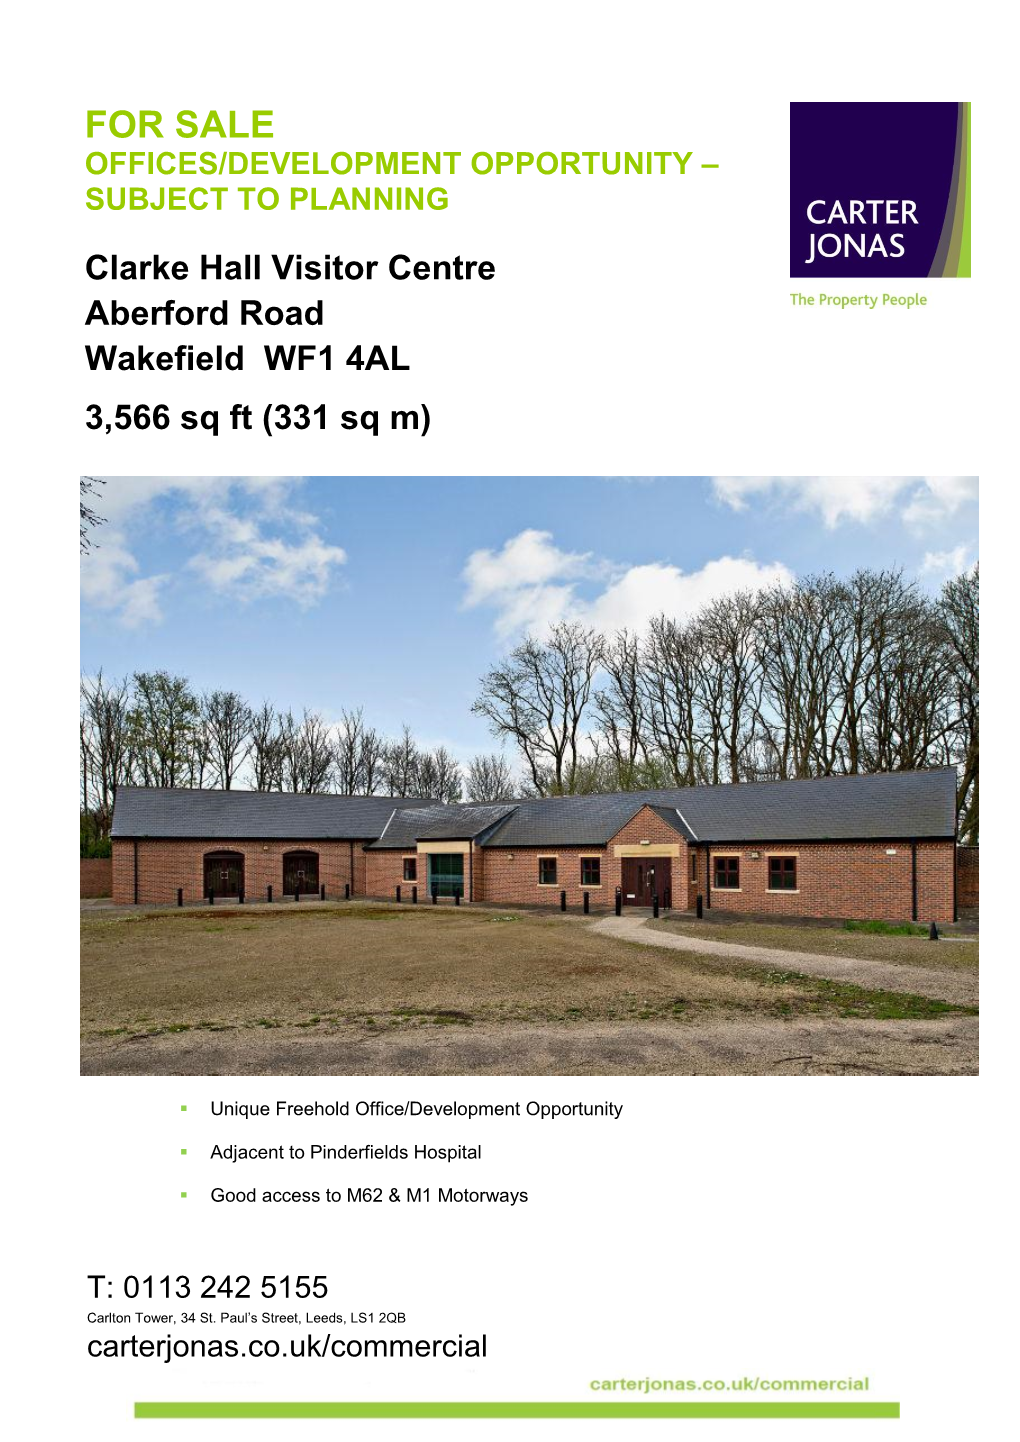 SUBJECT to PLANNING Clarke Hall Visitor Centre Aberford Road